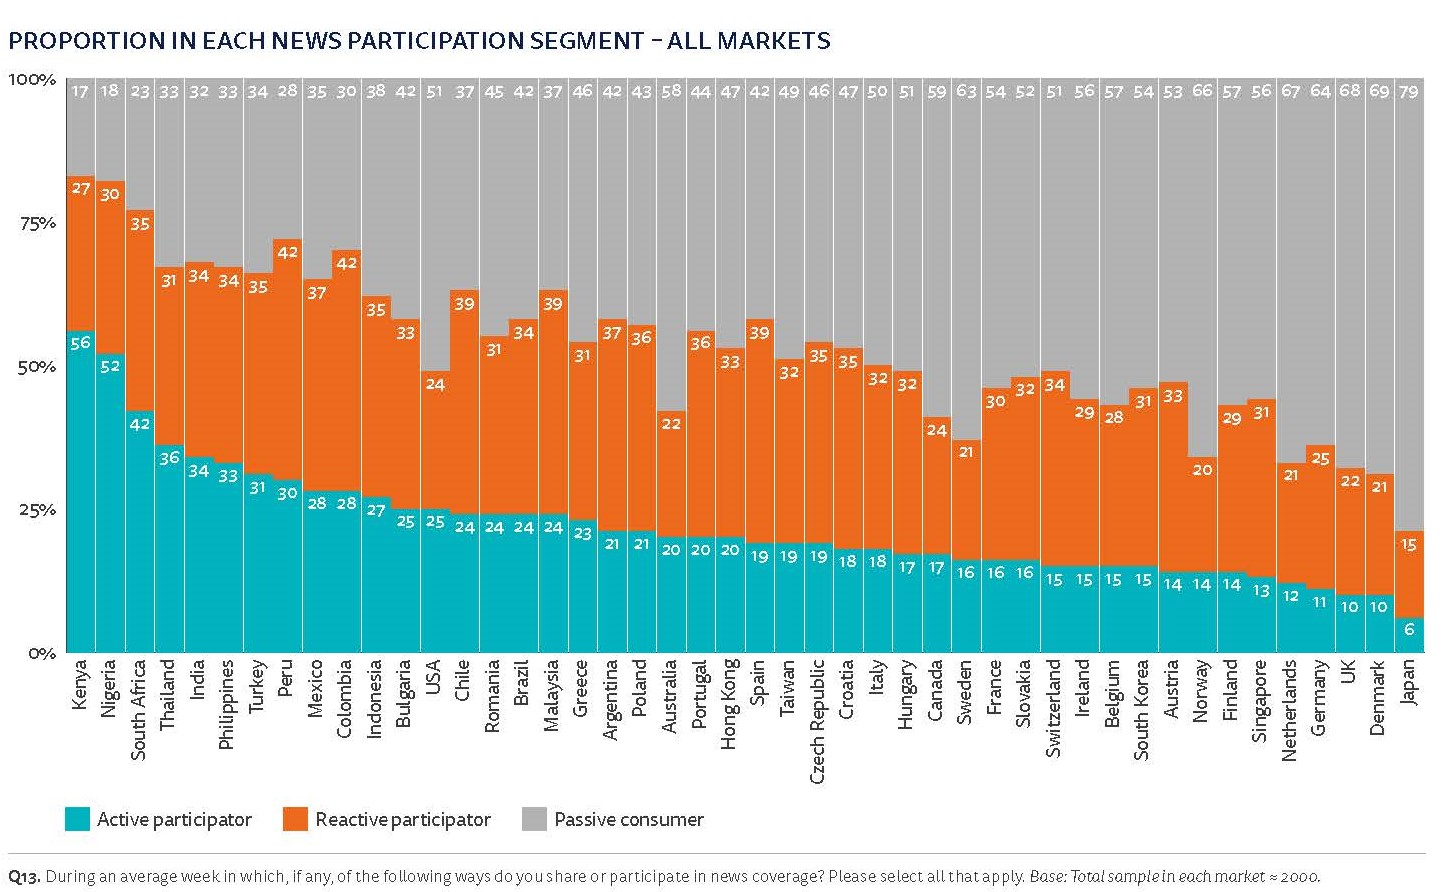 Proportion in each news participation segment- All markets